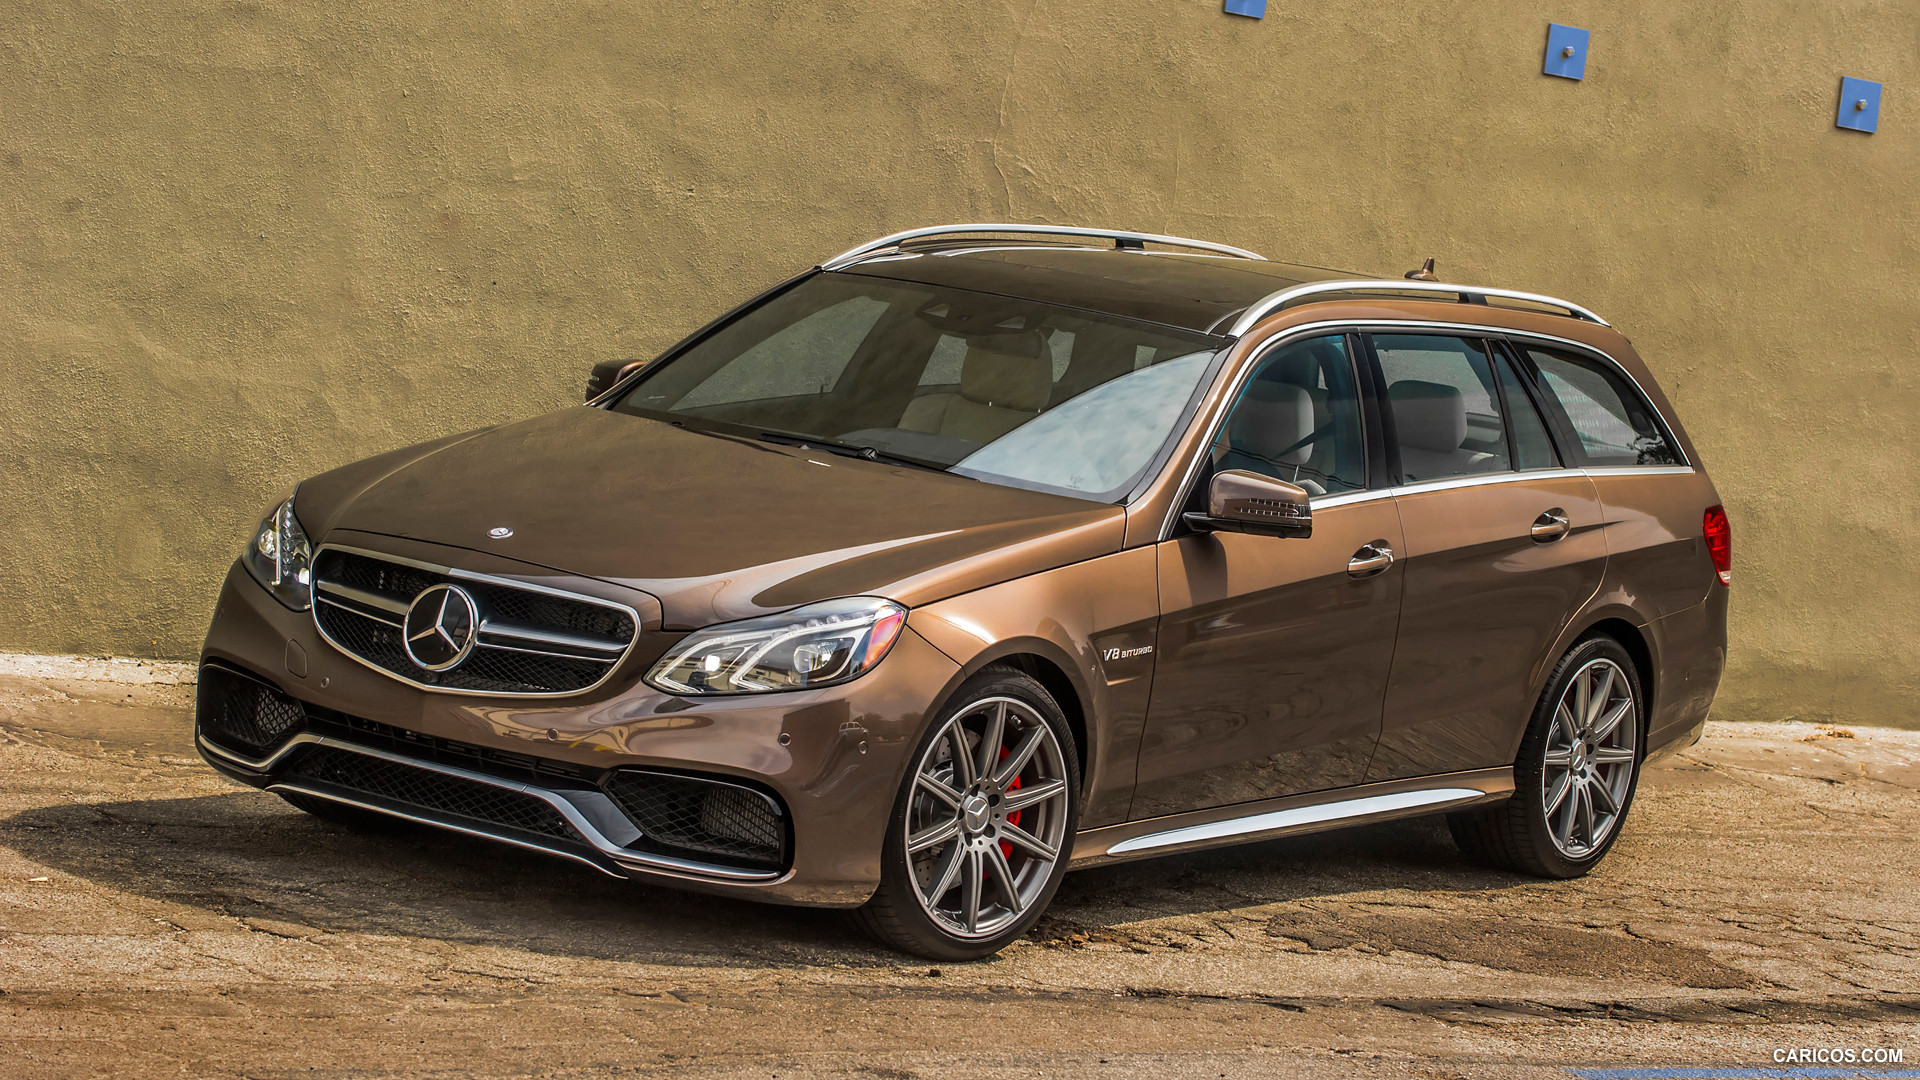  2014 Mercedes-Benz E 63 AMG S-Model Wagon (US Version) - Front, #16 of 27